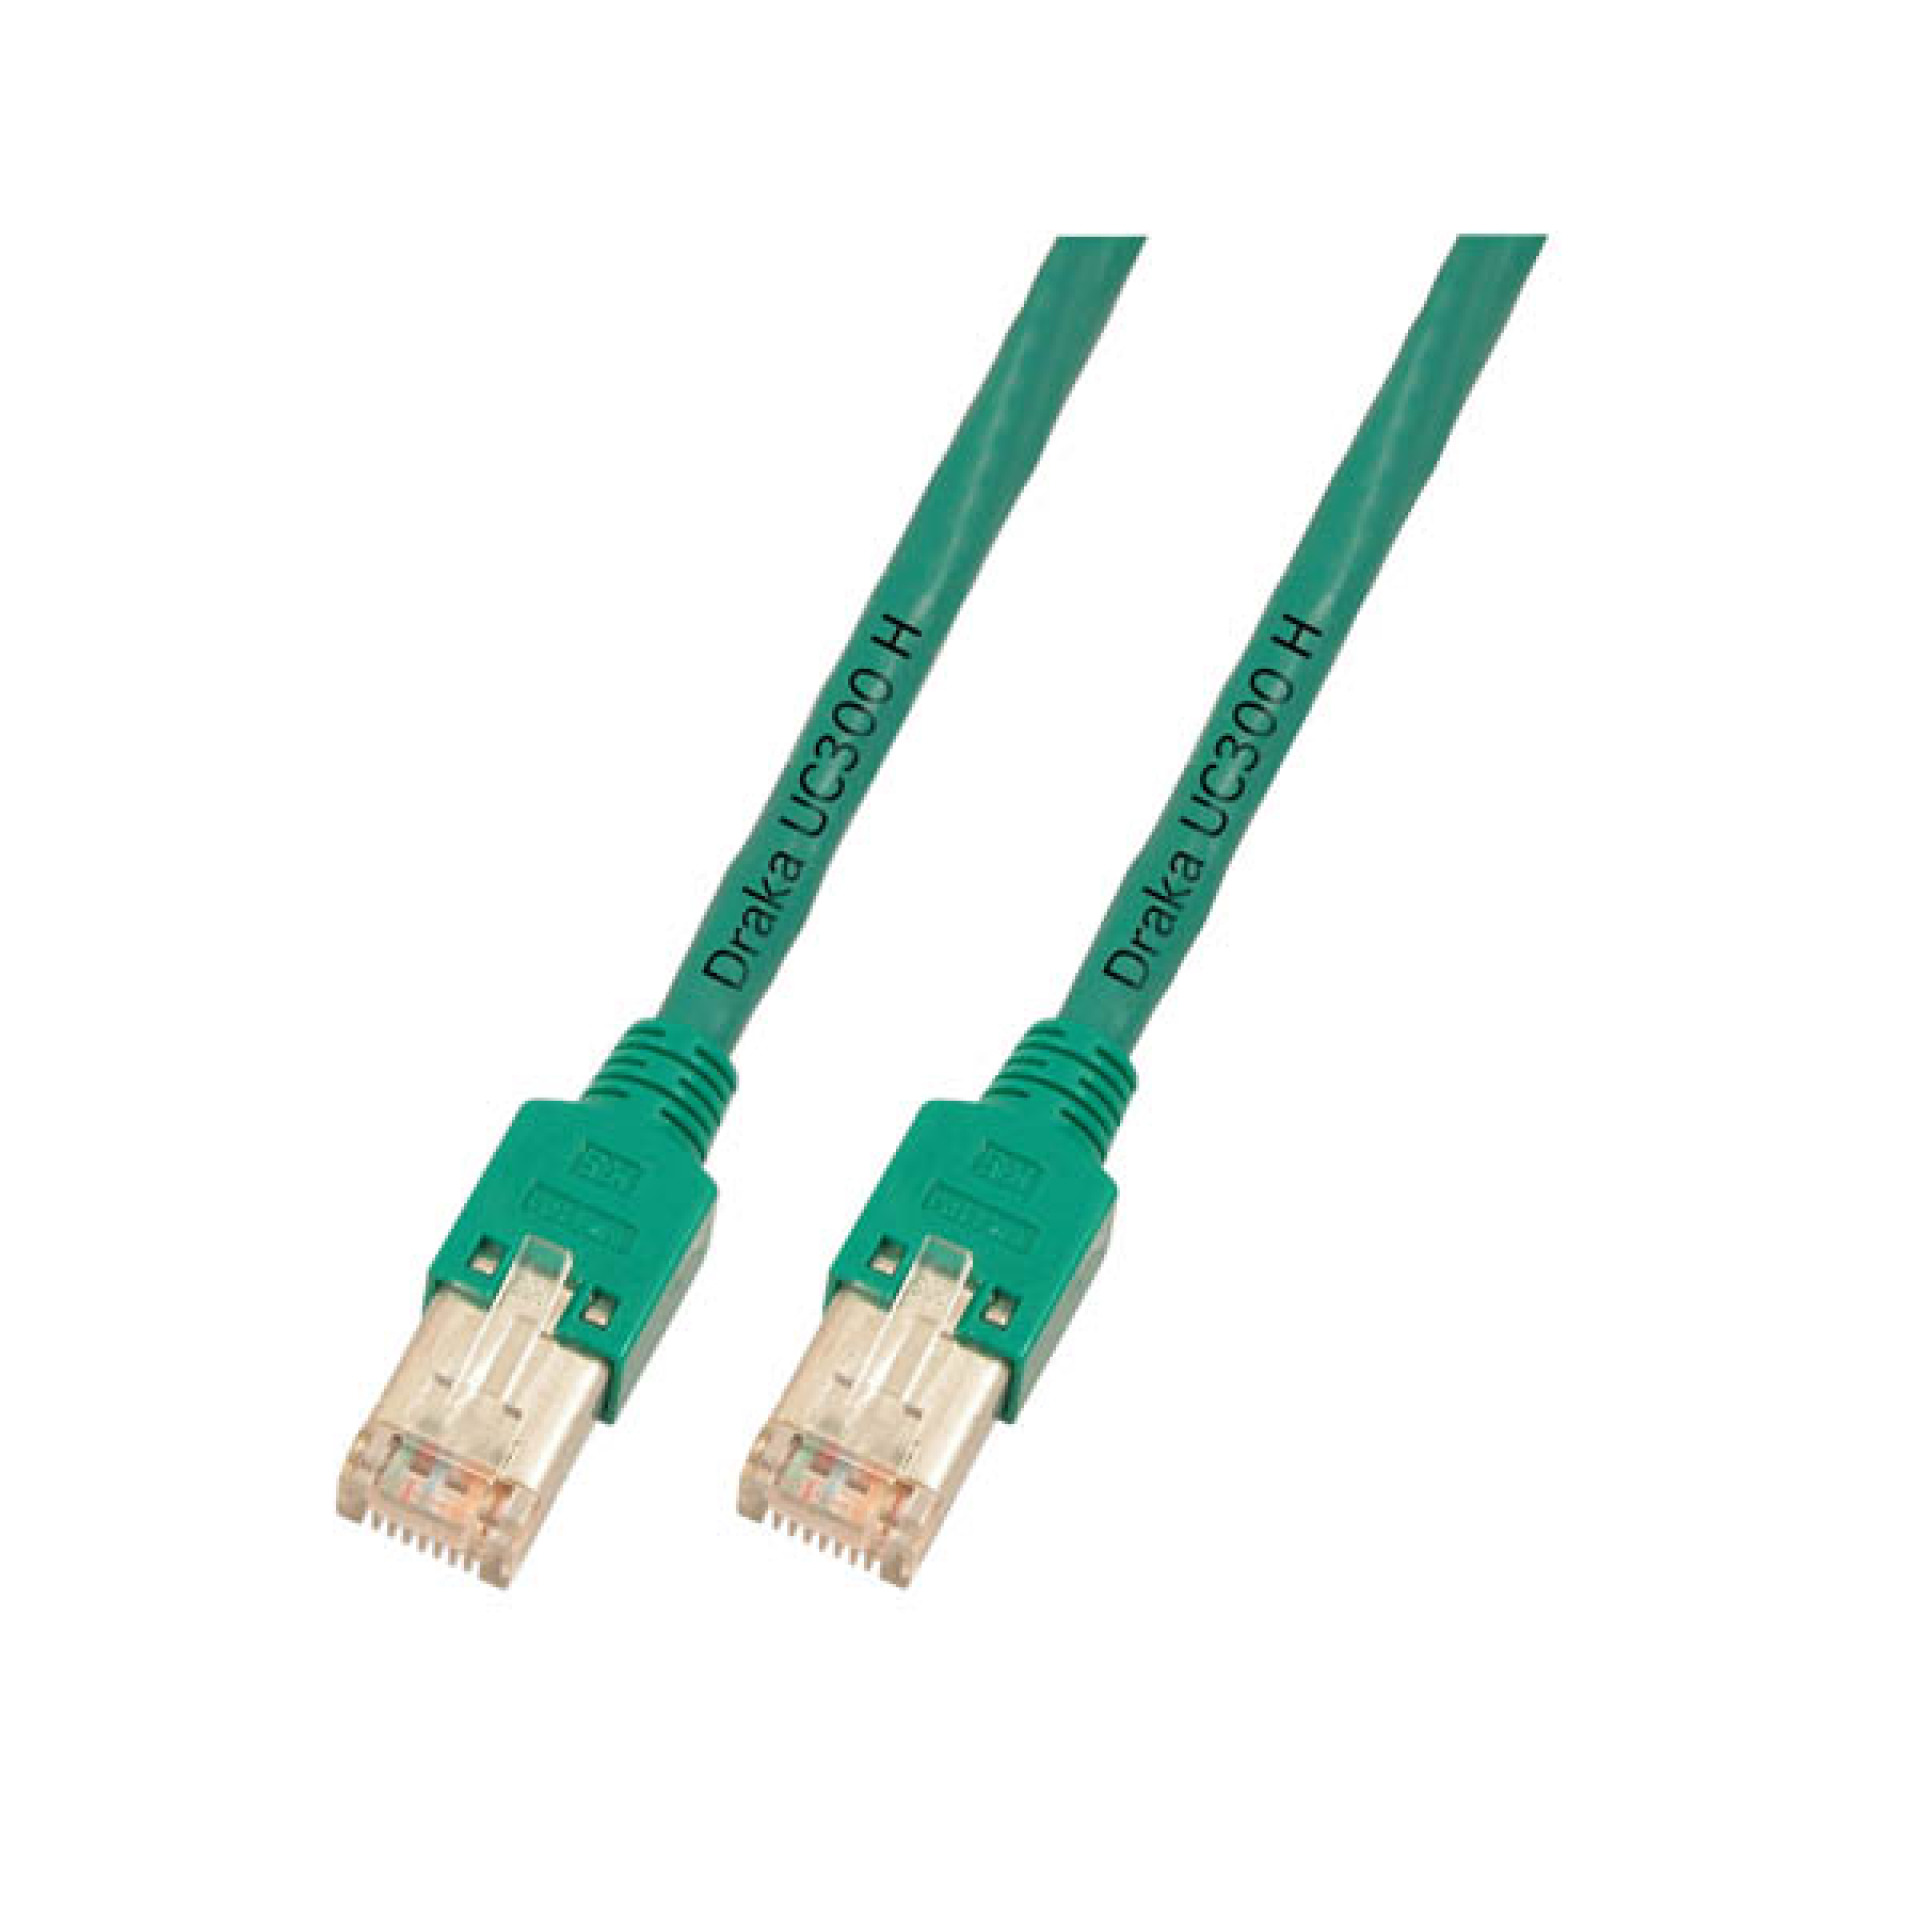 RJ45 Patch cable F/UTP, Cat.5e, TM11, UC300, 1,5m, green